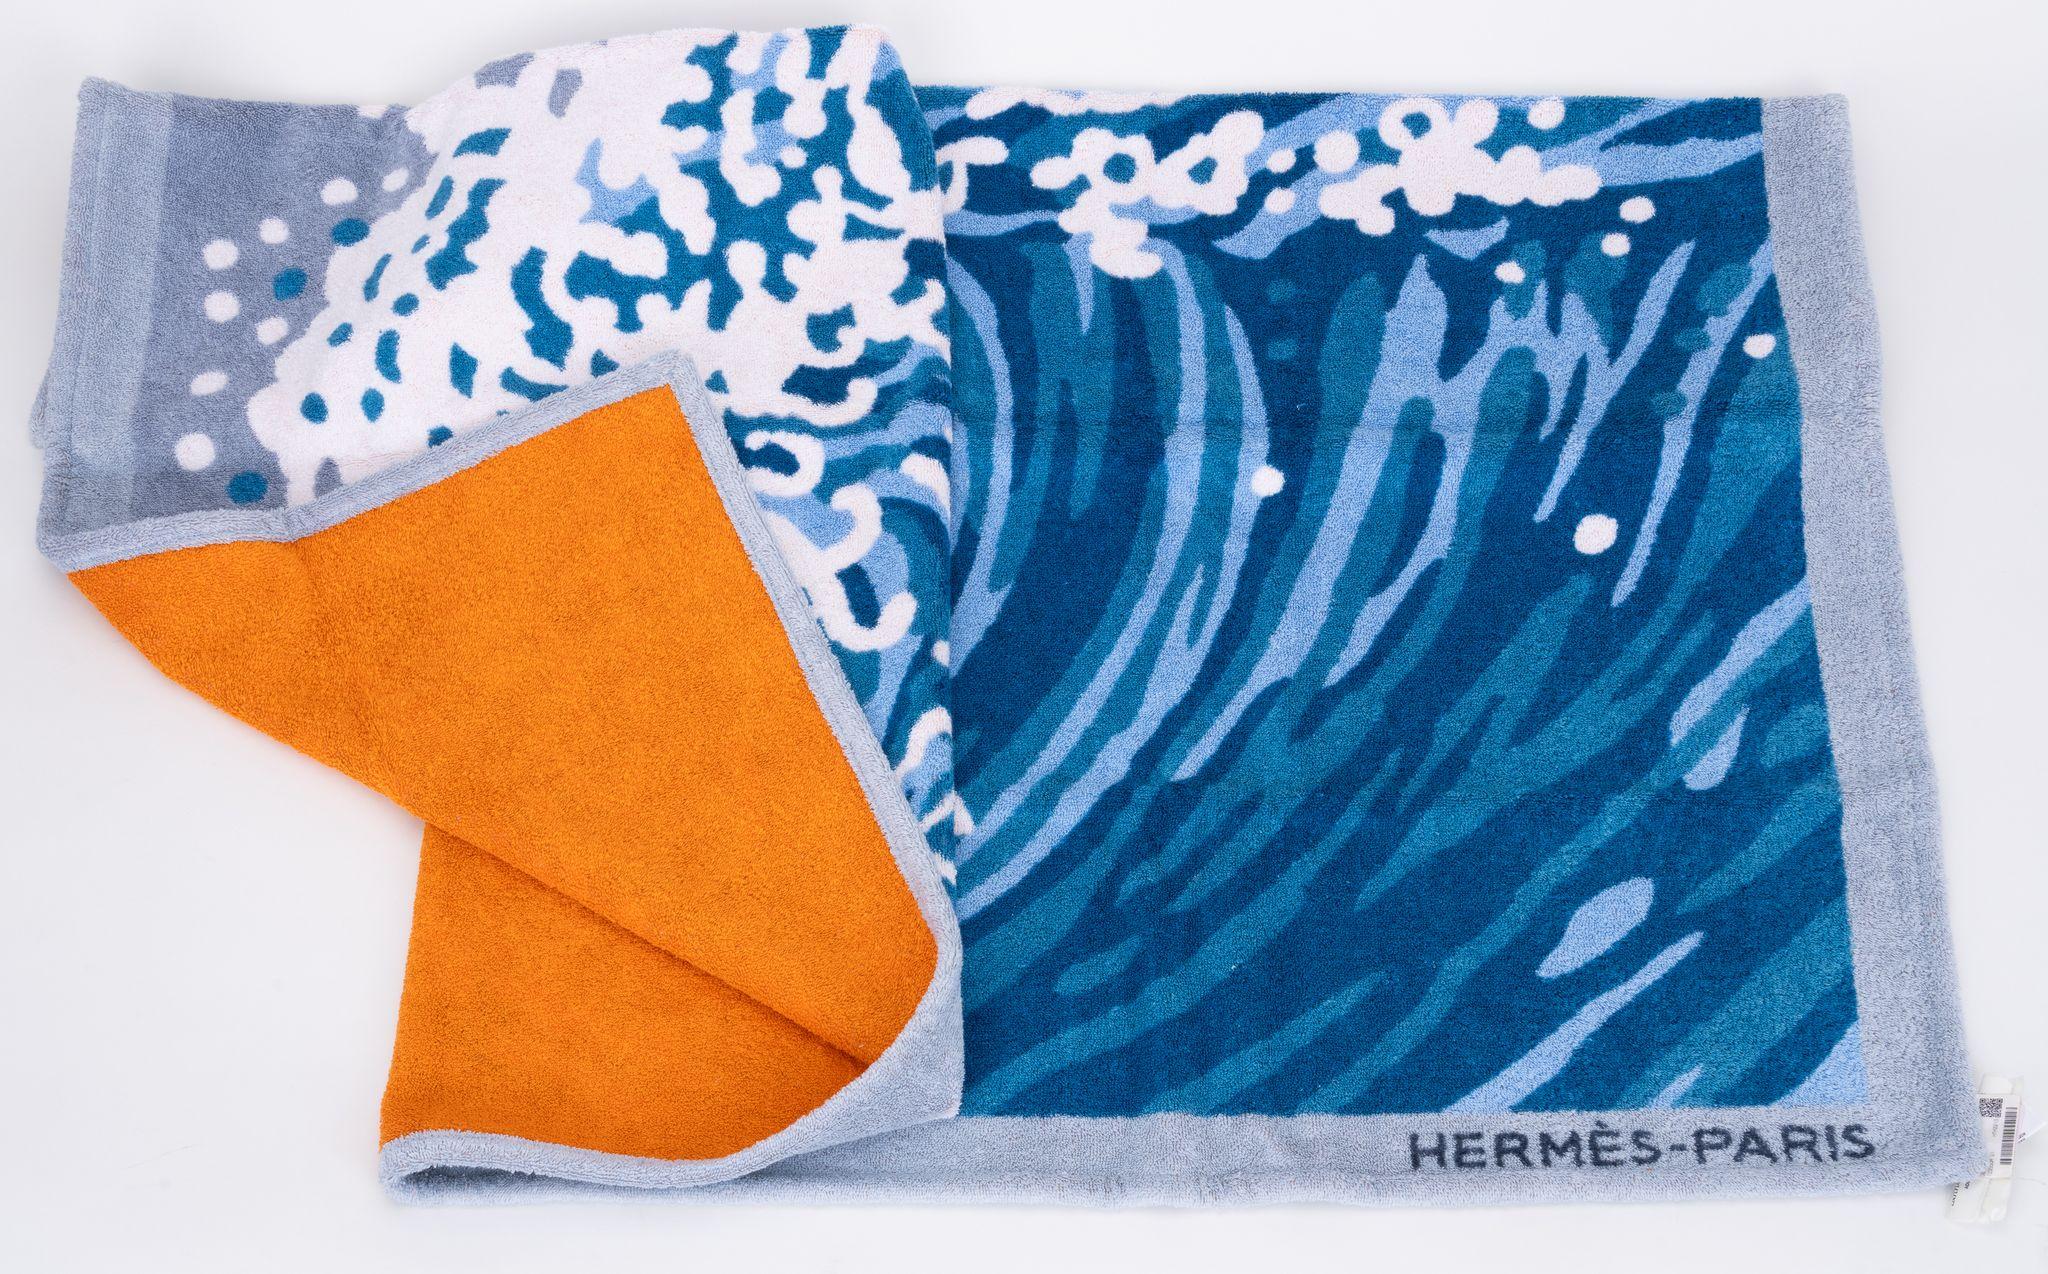 Hermès beach cotton towel with beach wave and surfer design. New with original box.